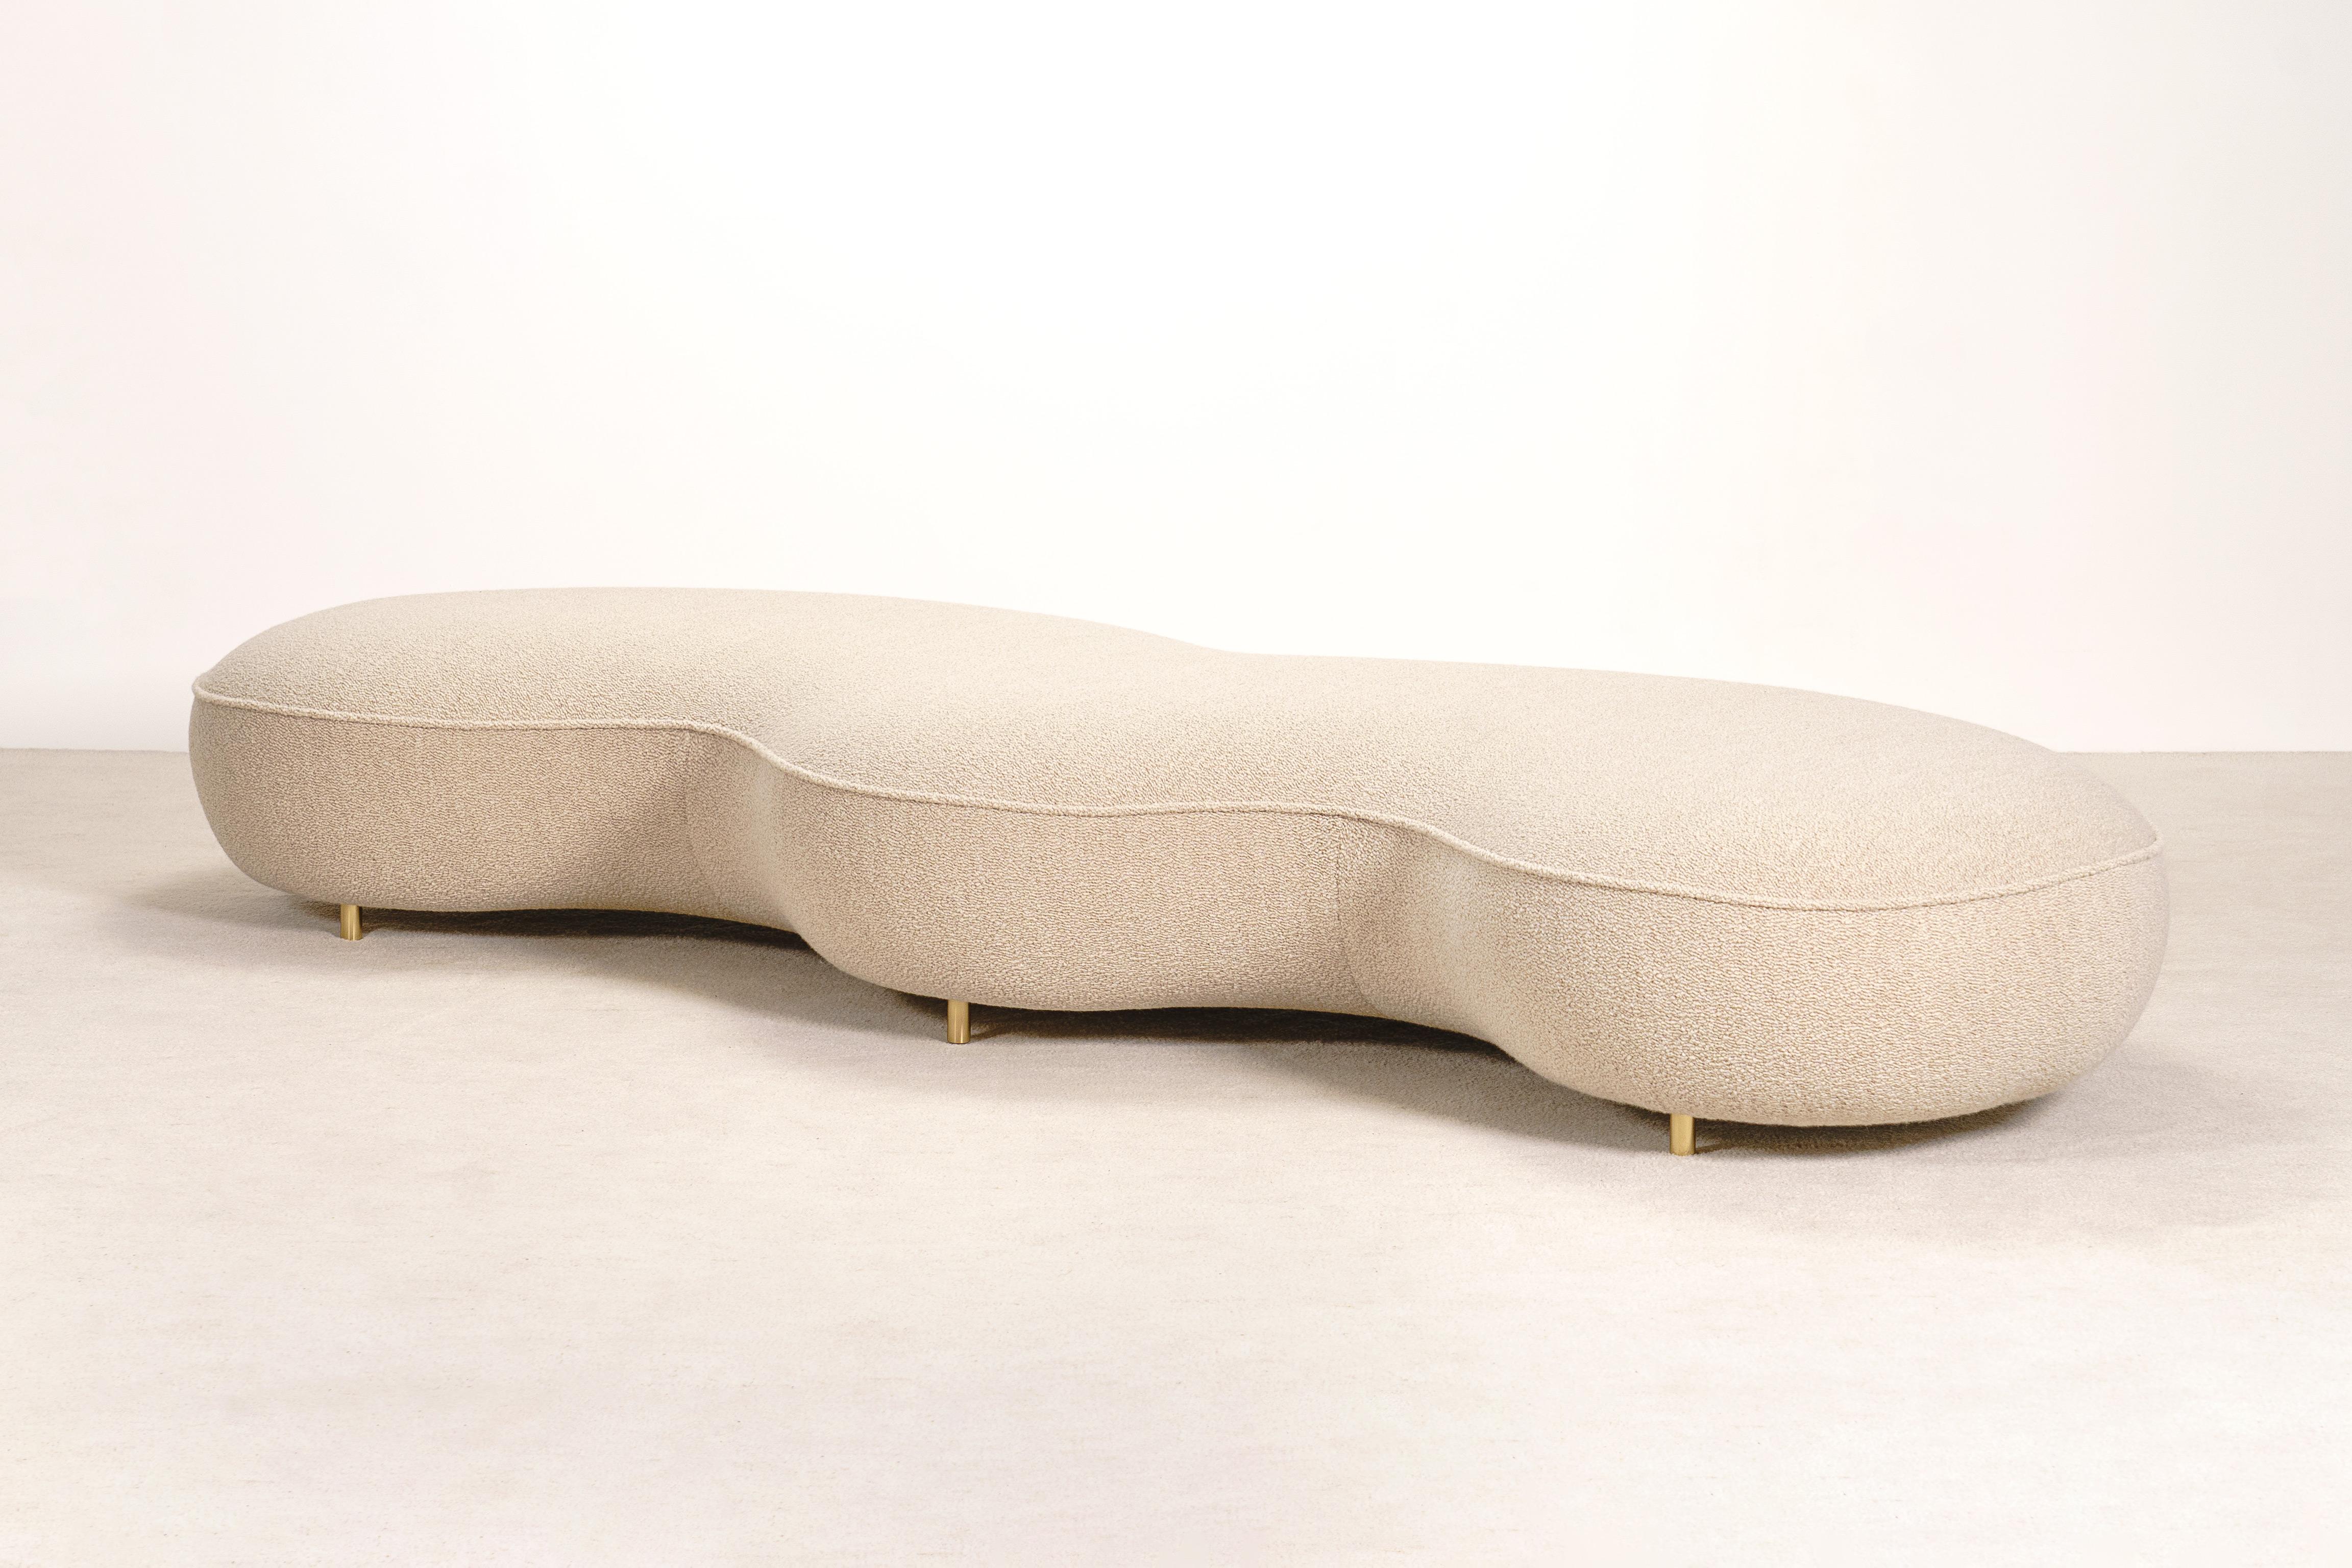 Bonnie Daybed by Proisy Studio. 

Bonnie is an elegant and refined 3 meters long curved daybed or bench designed by Proisy Studio. This piece is a part of a collection named 